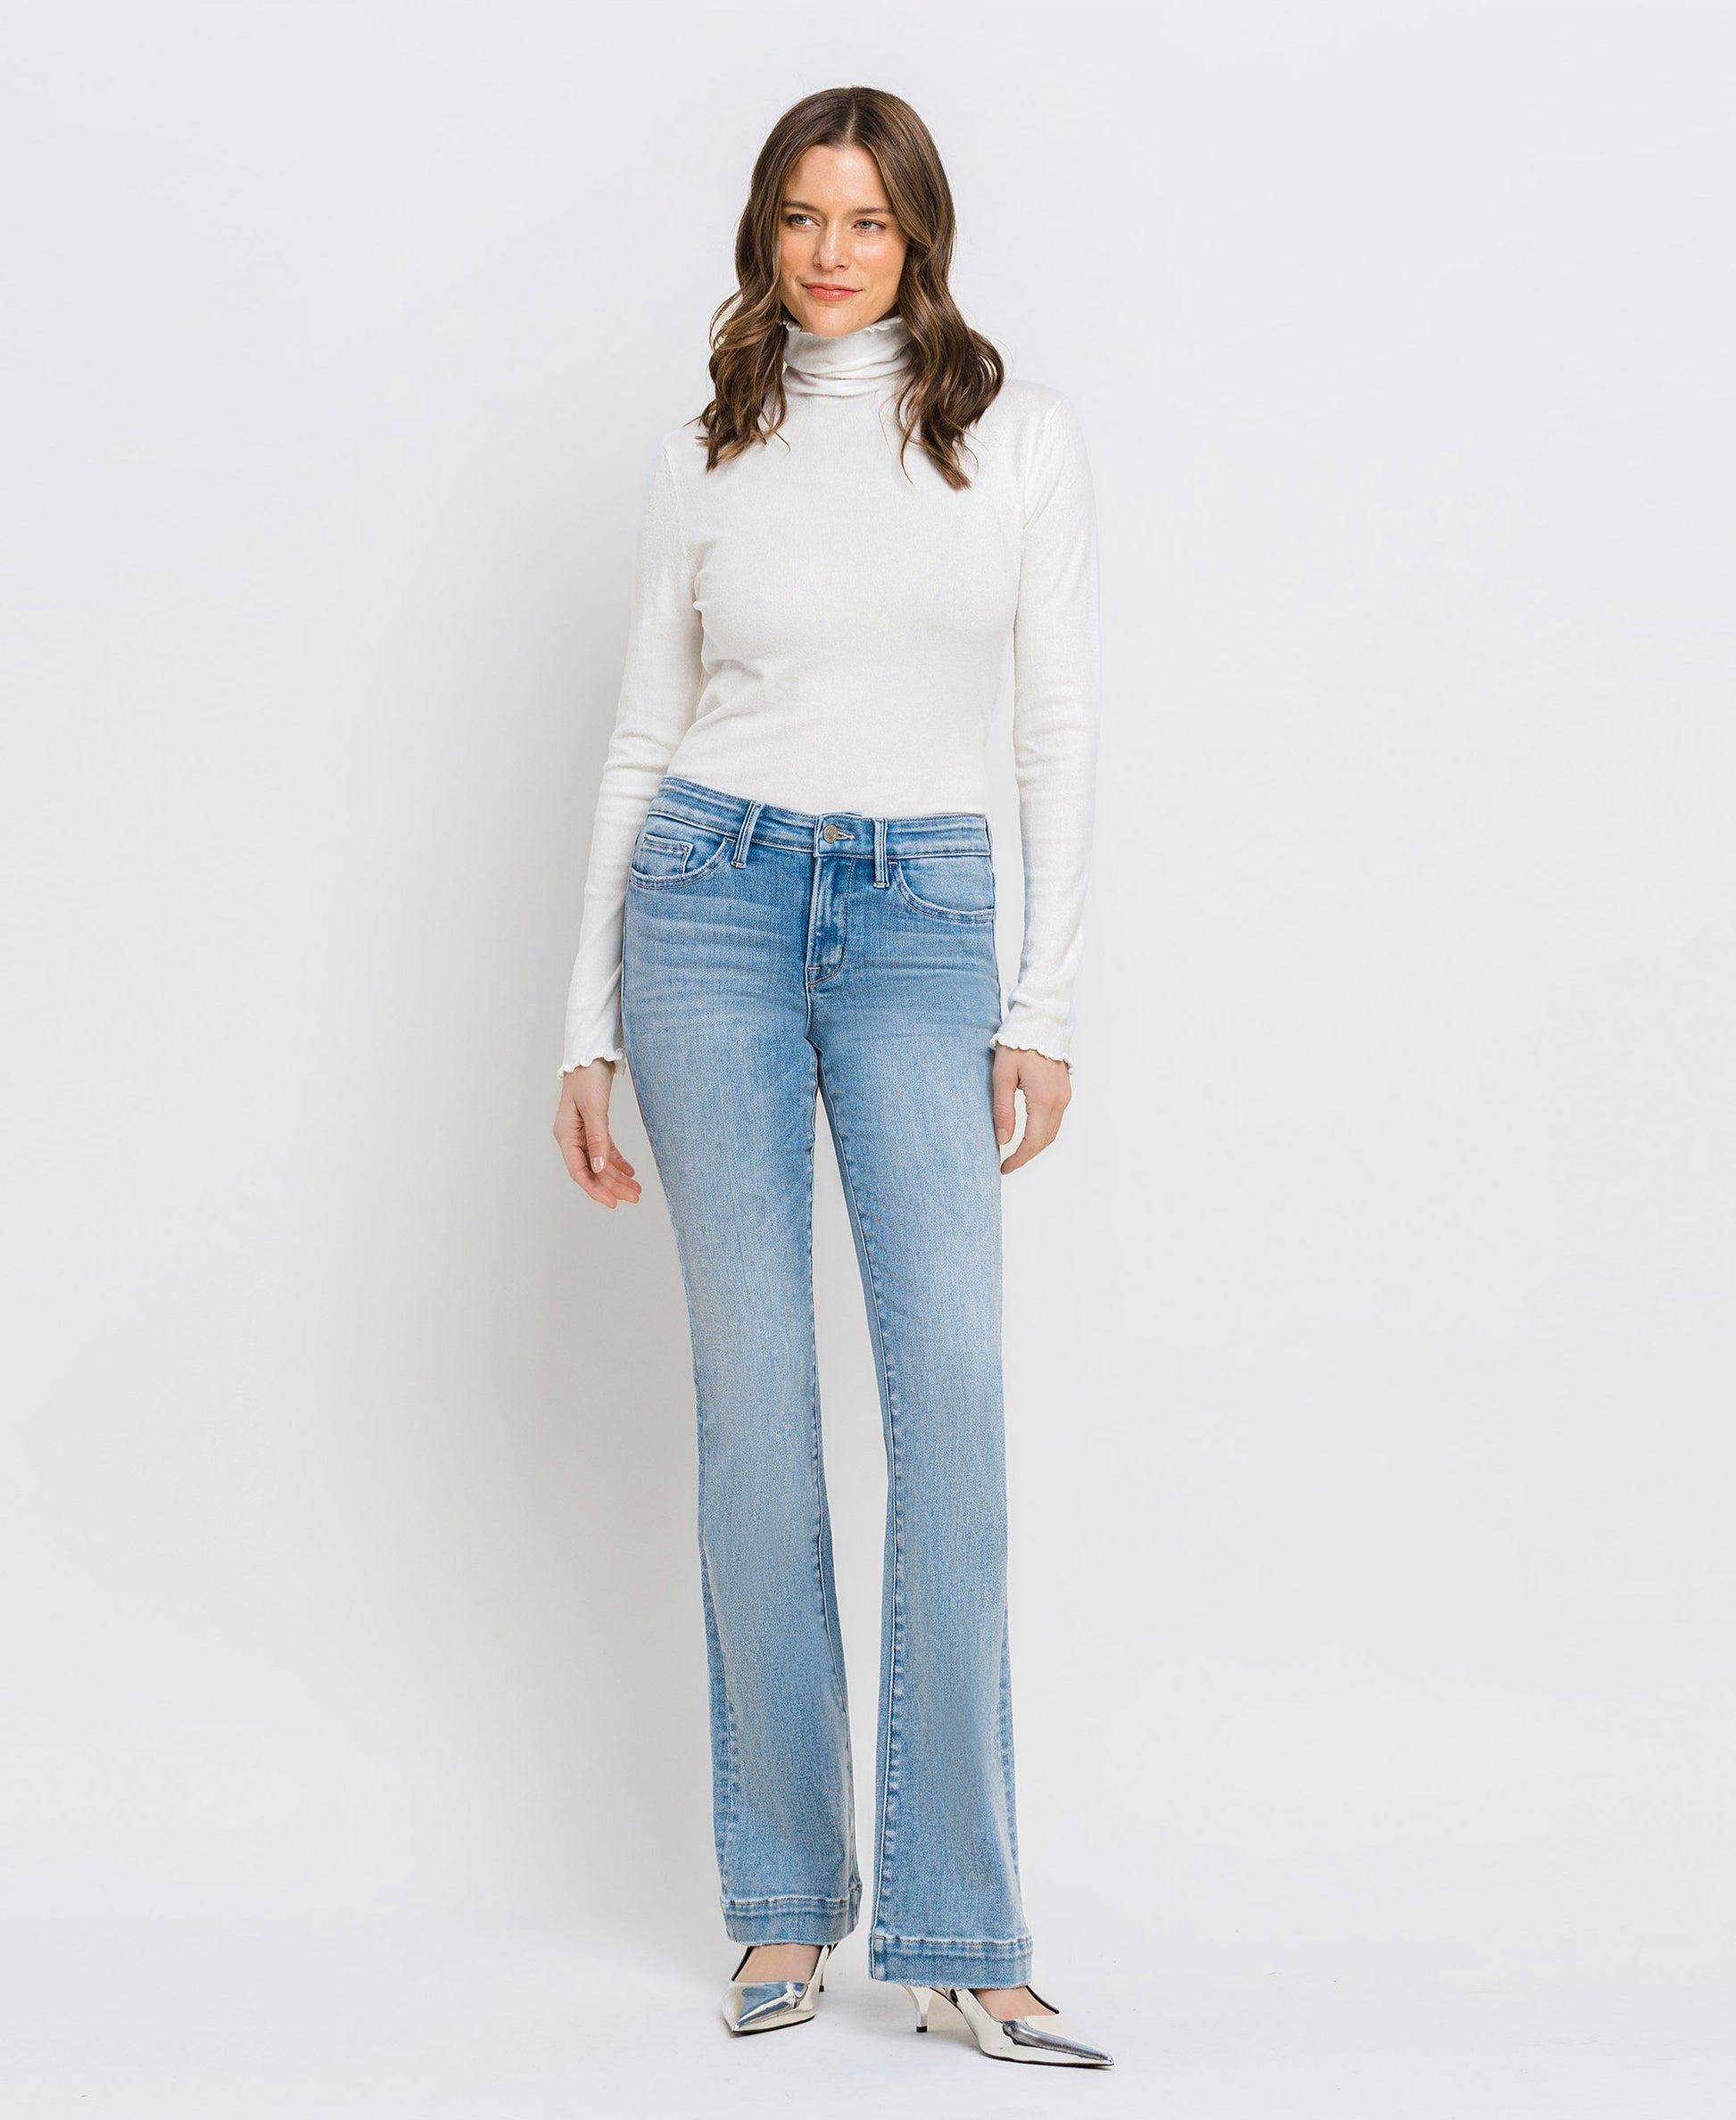 Front product images of Lengendary - Mid Rise Bootcut Jeans